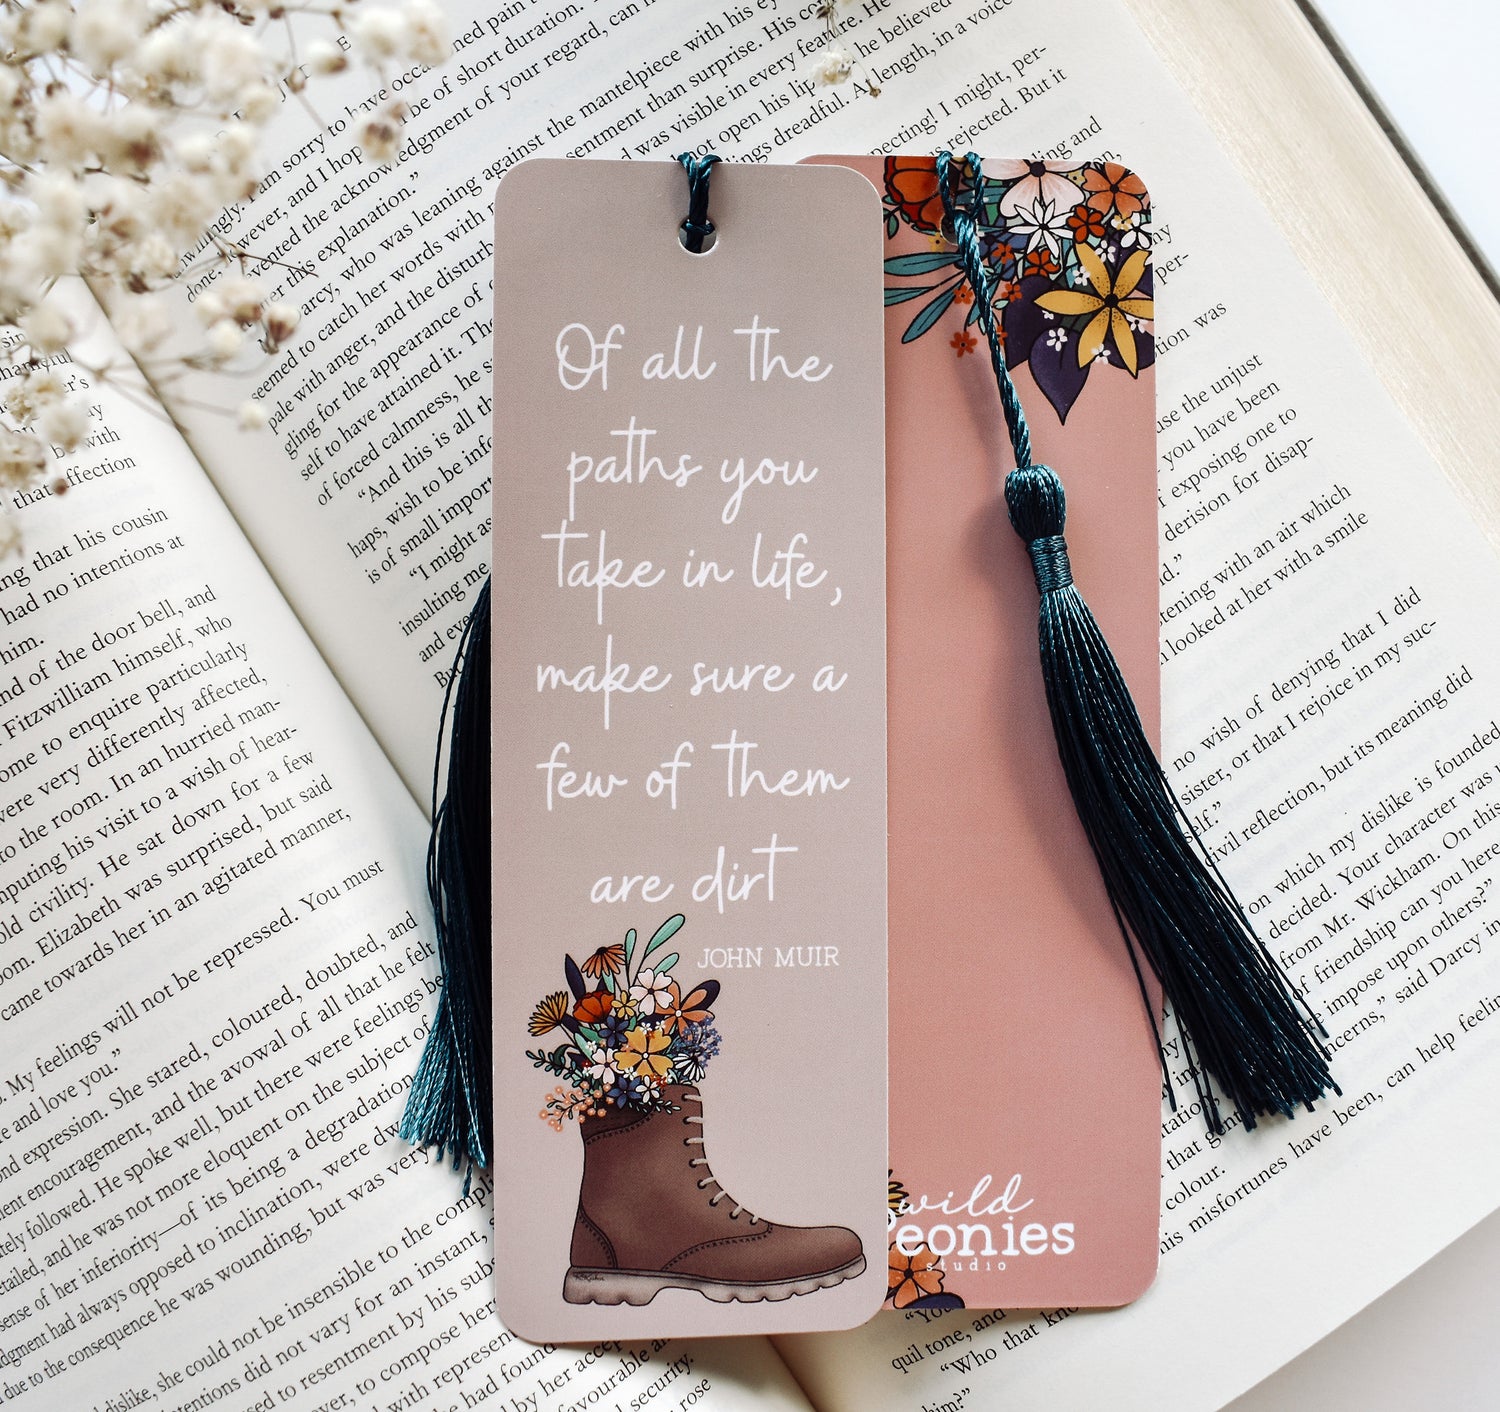 Bookmark with the John Muir quote &quot;Of all the paths you take in life, make sure a few of them are dirt&quot; and a hiking boot with flowers design